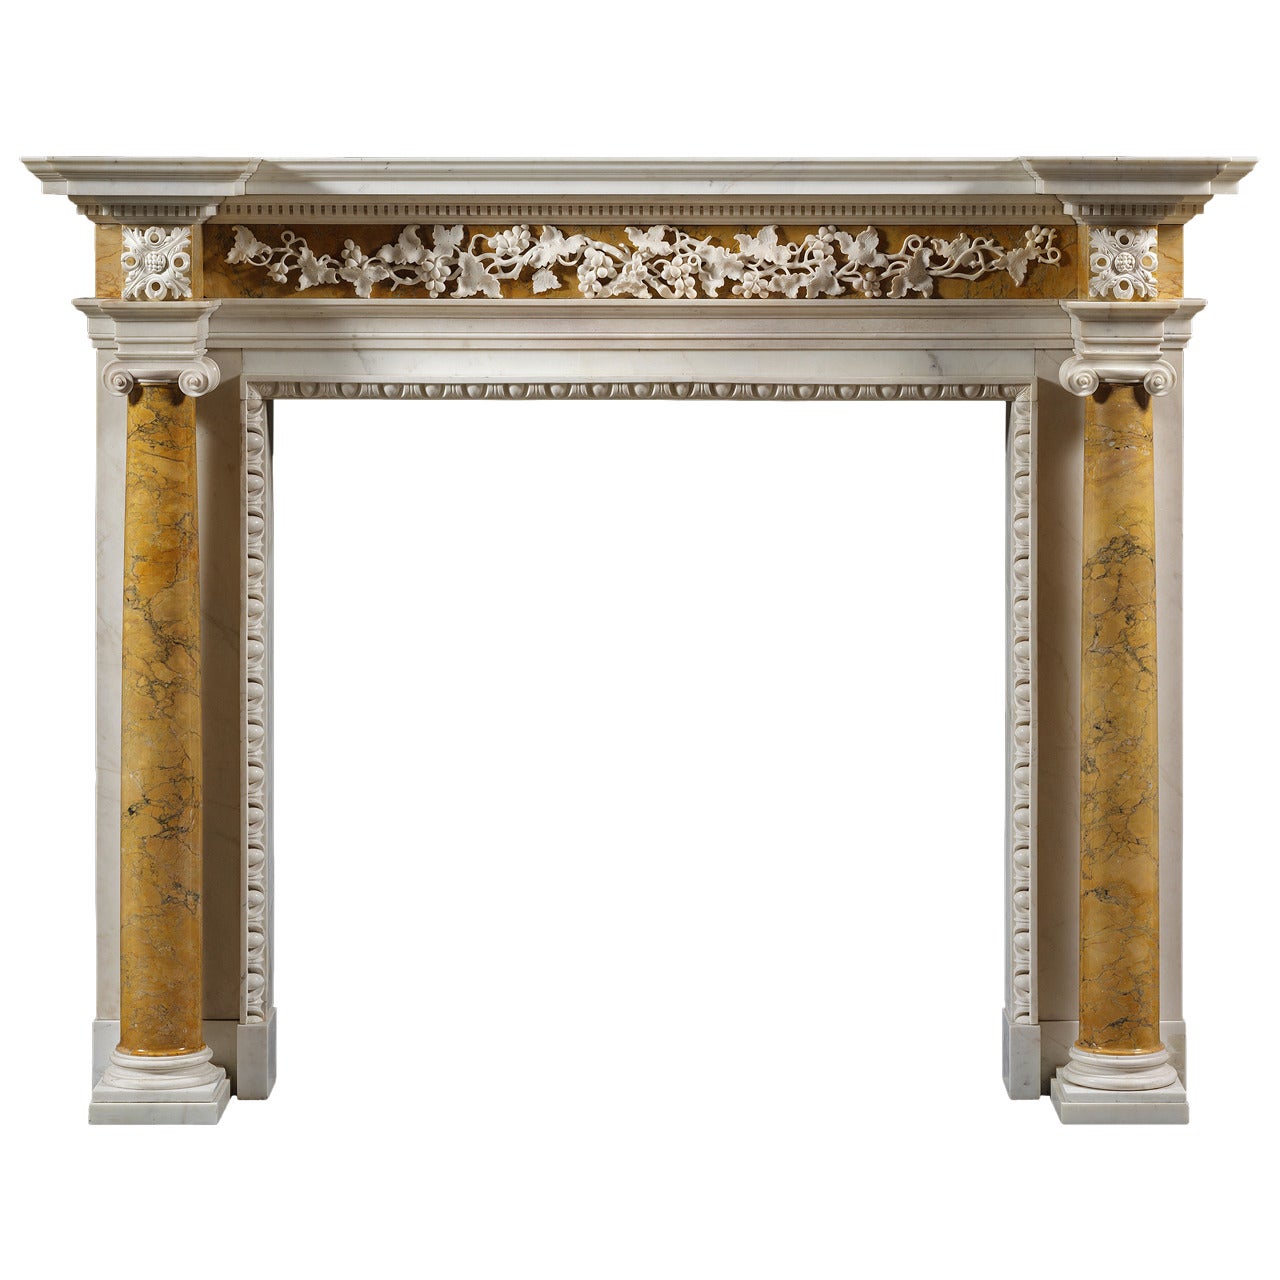 Important Antique George II English Fireplace Mantel